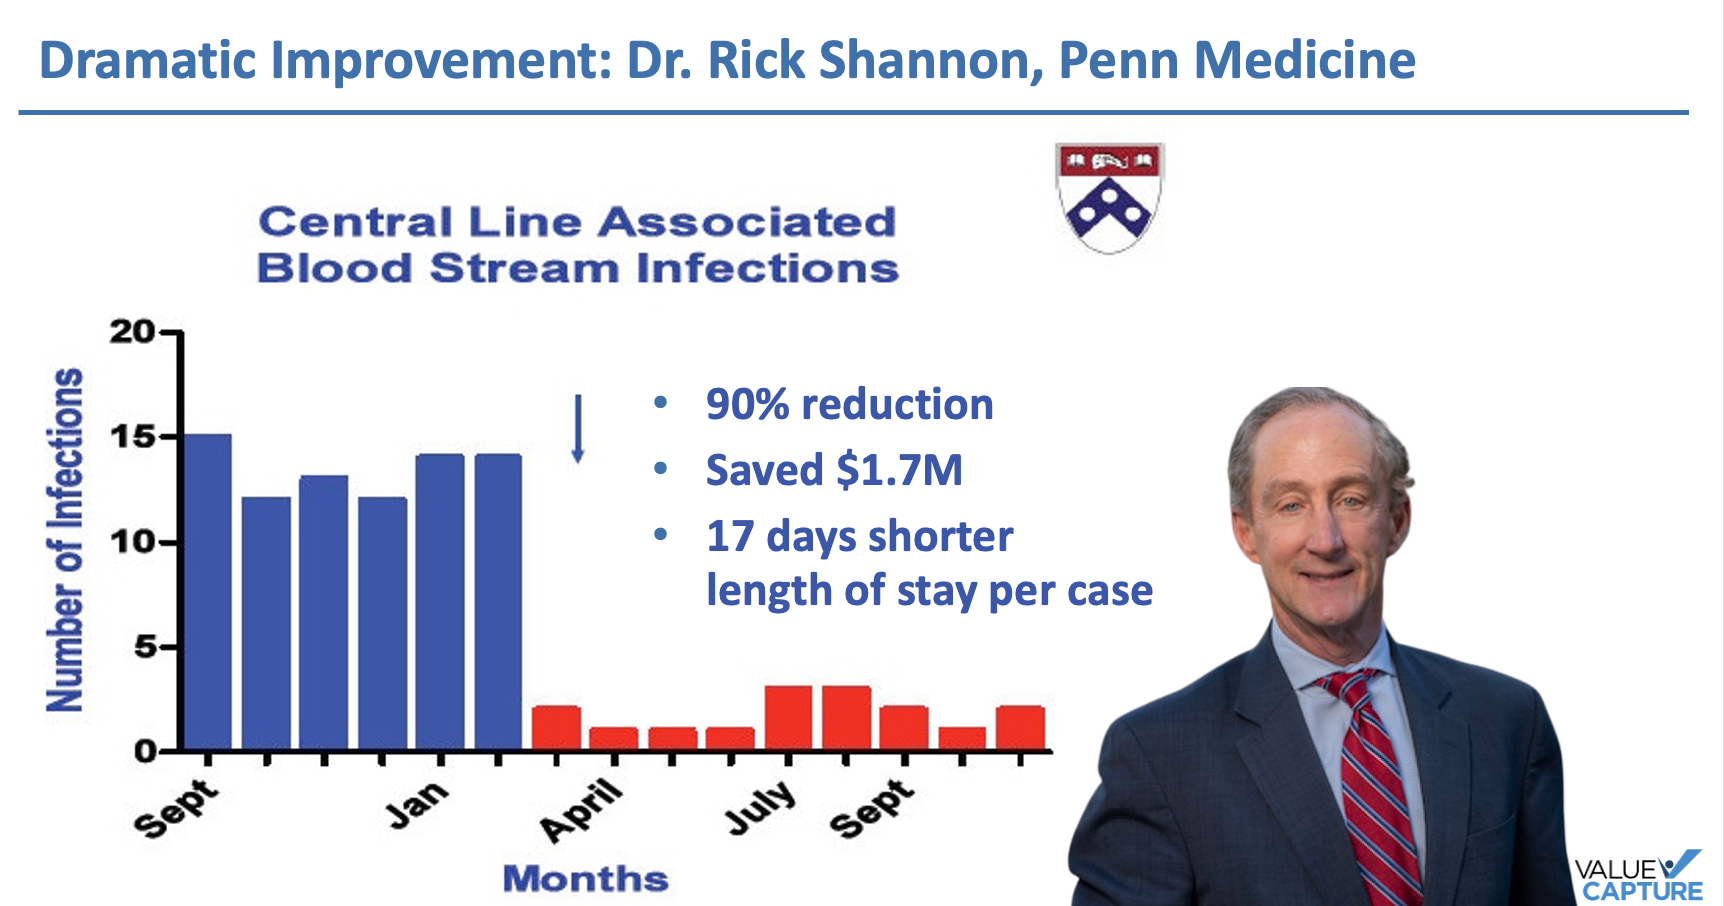 Rick shannon penn habitual excellence value capture results